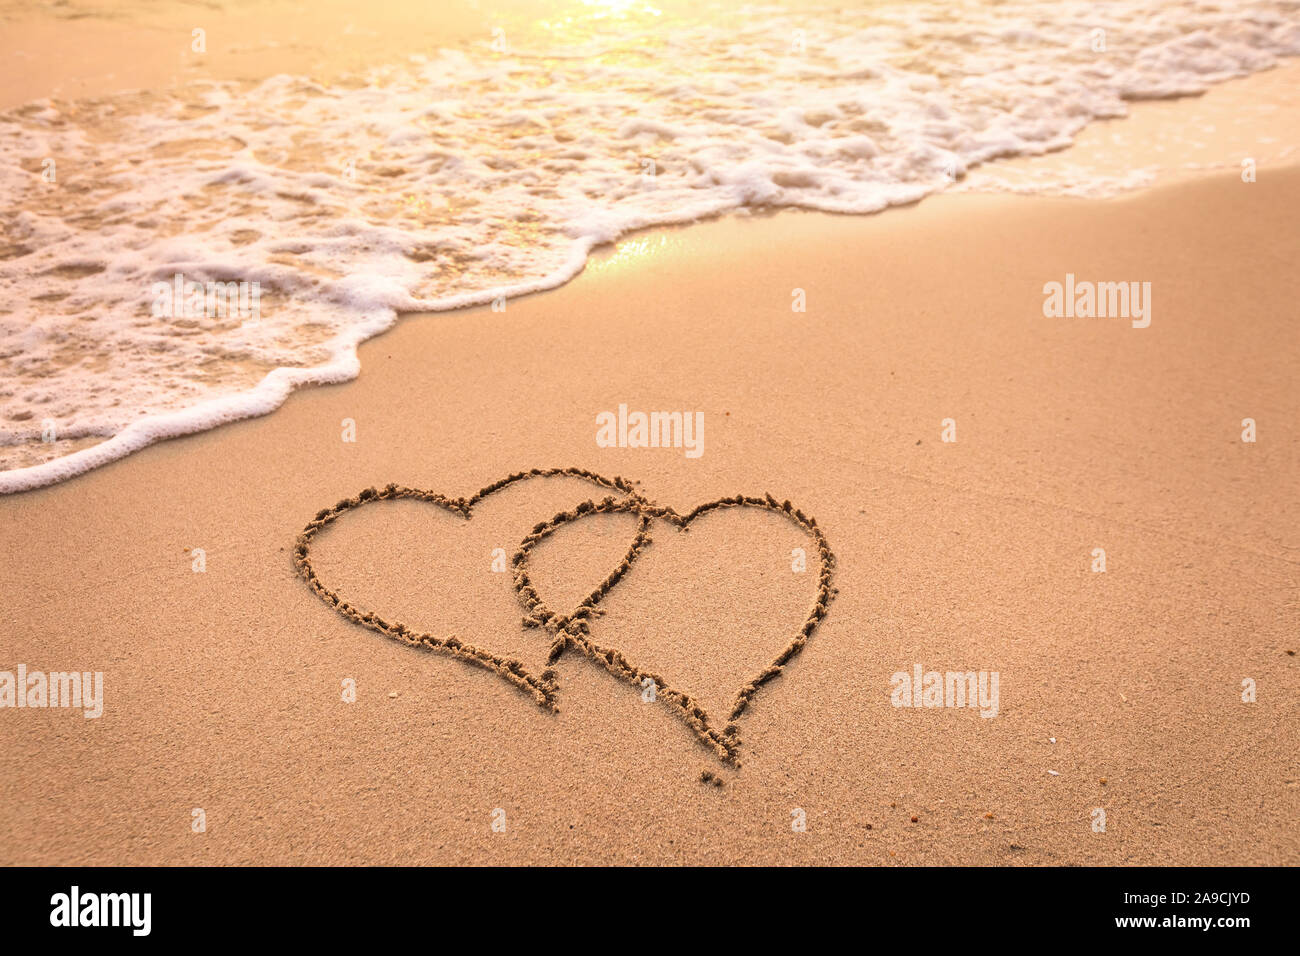 Romantic honeymoon holiday or Valentine's day on the beach concept with two hearts drawn on the sand, tropical getaway for couples, love symbol Stock Photo